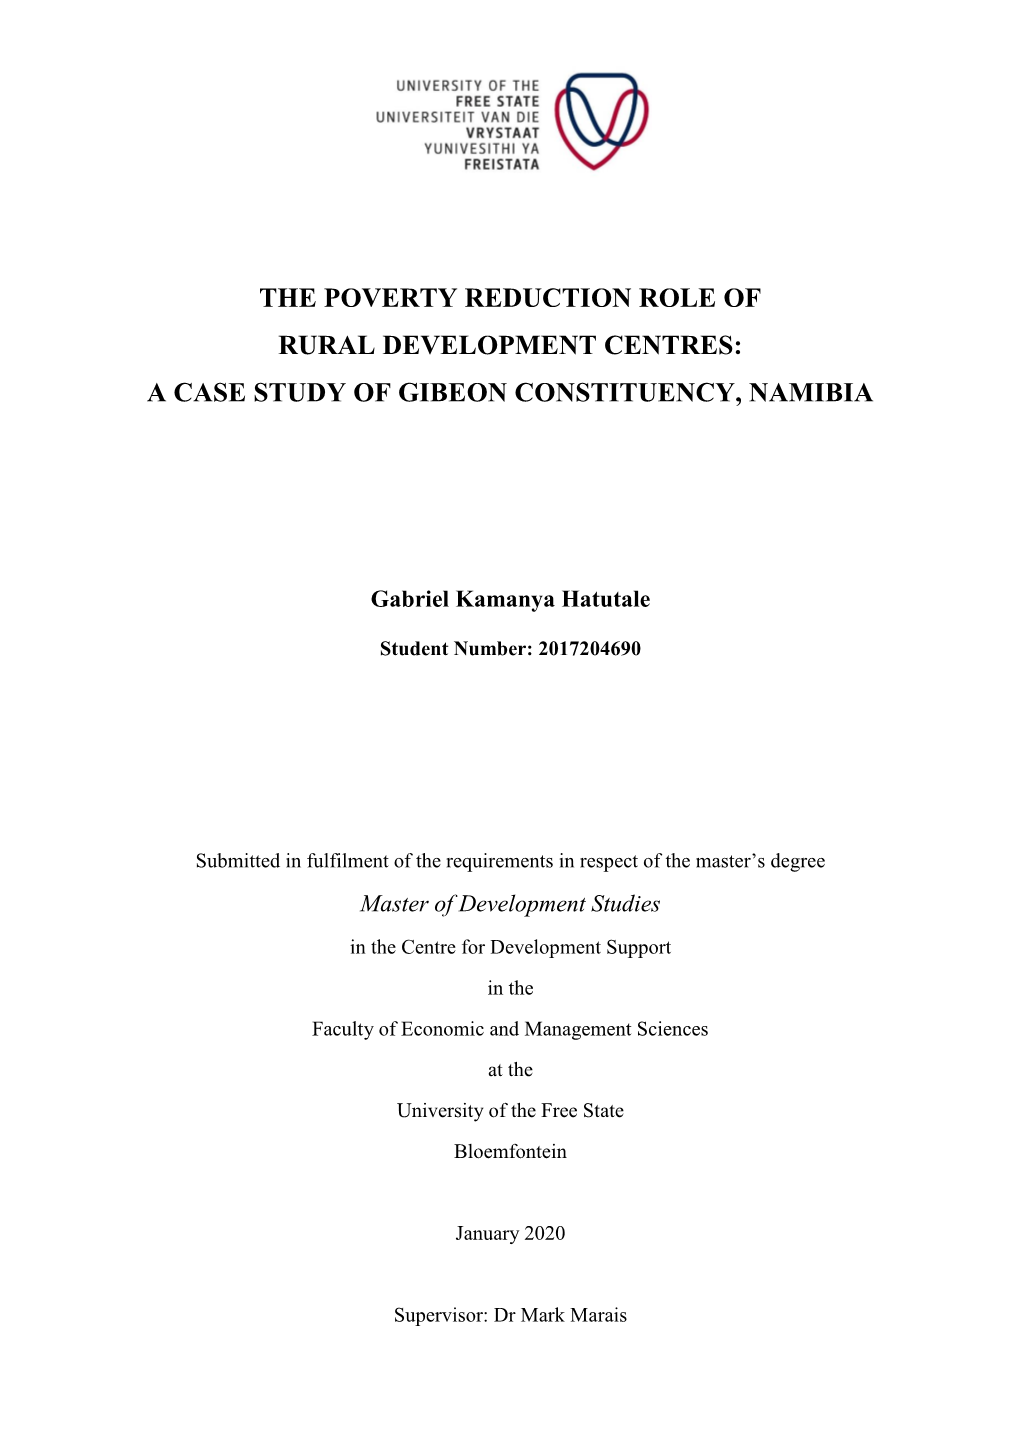 A Case Study of Gibeon Constituency, Namibia